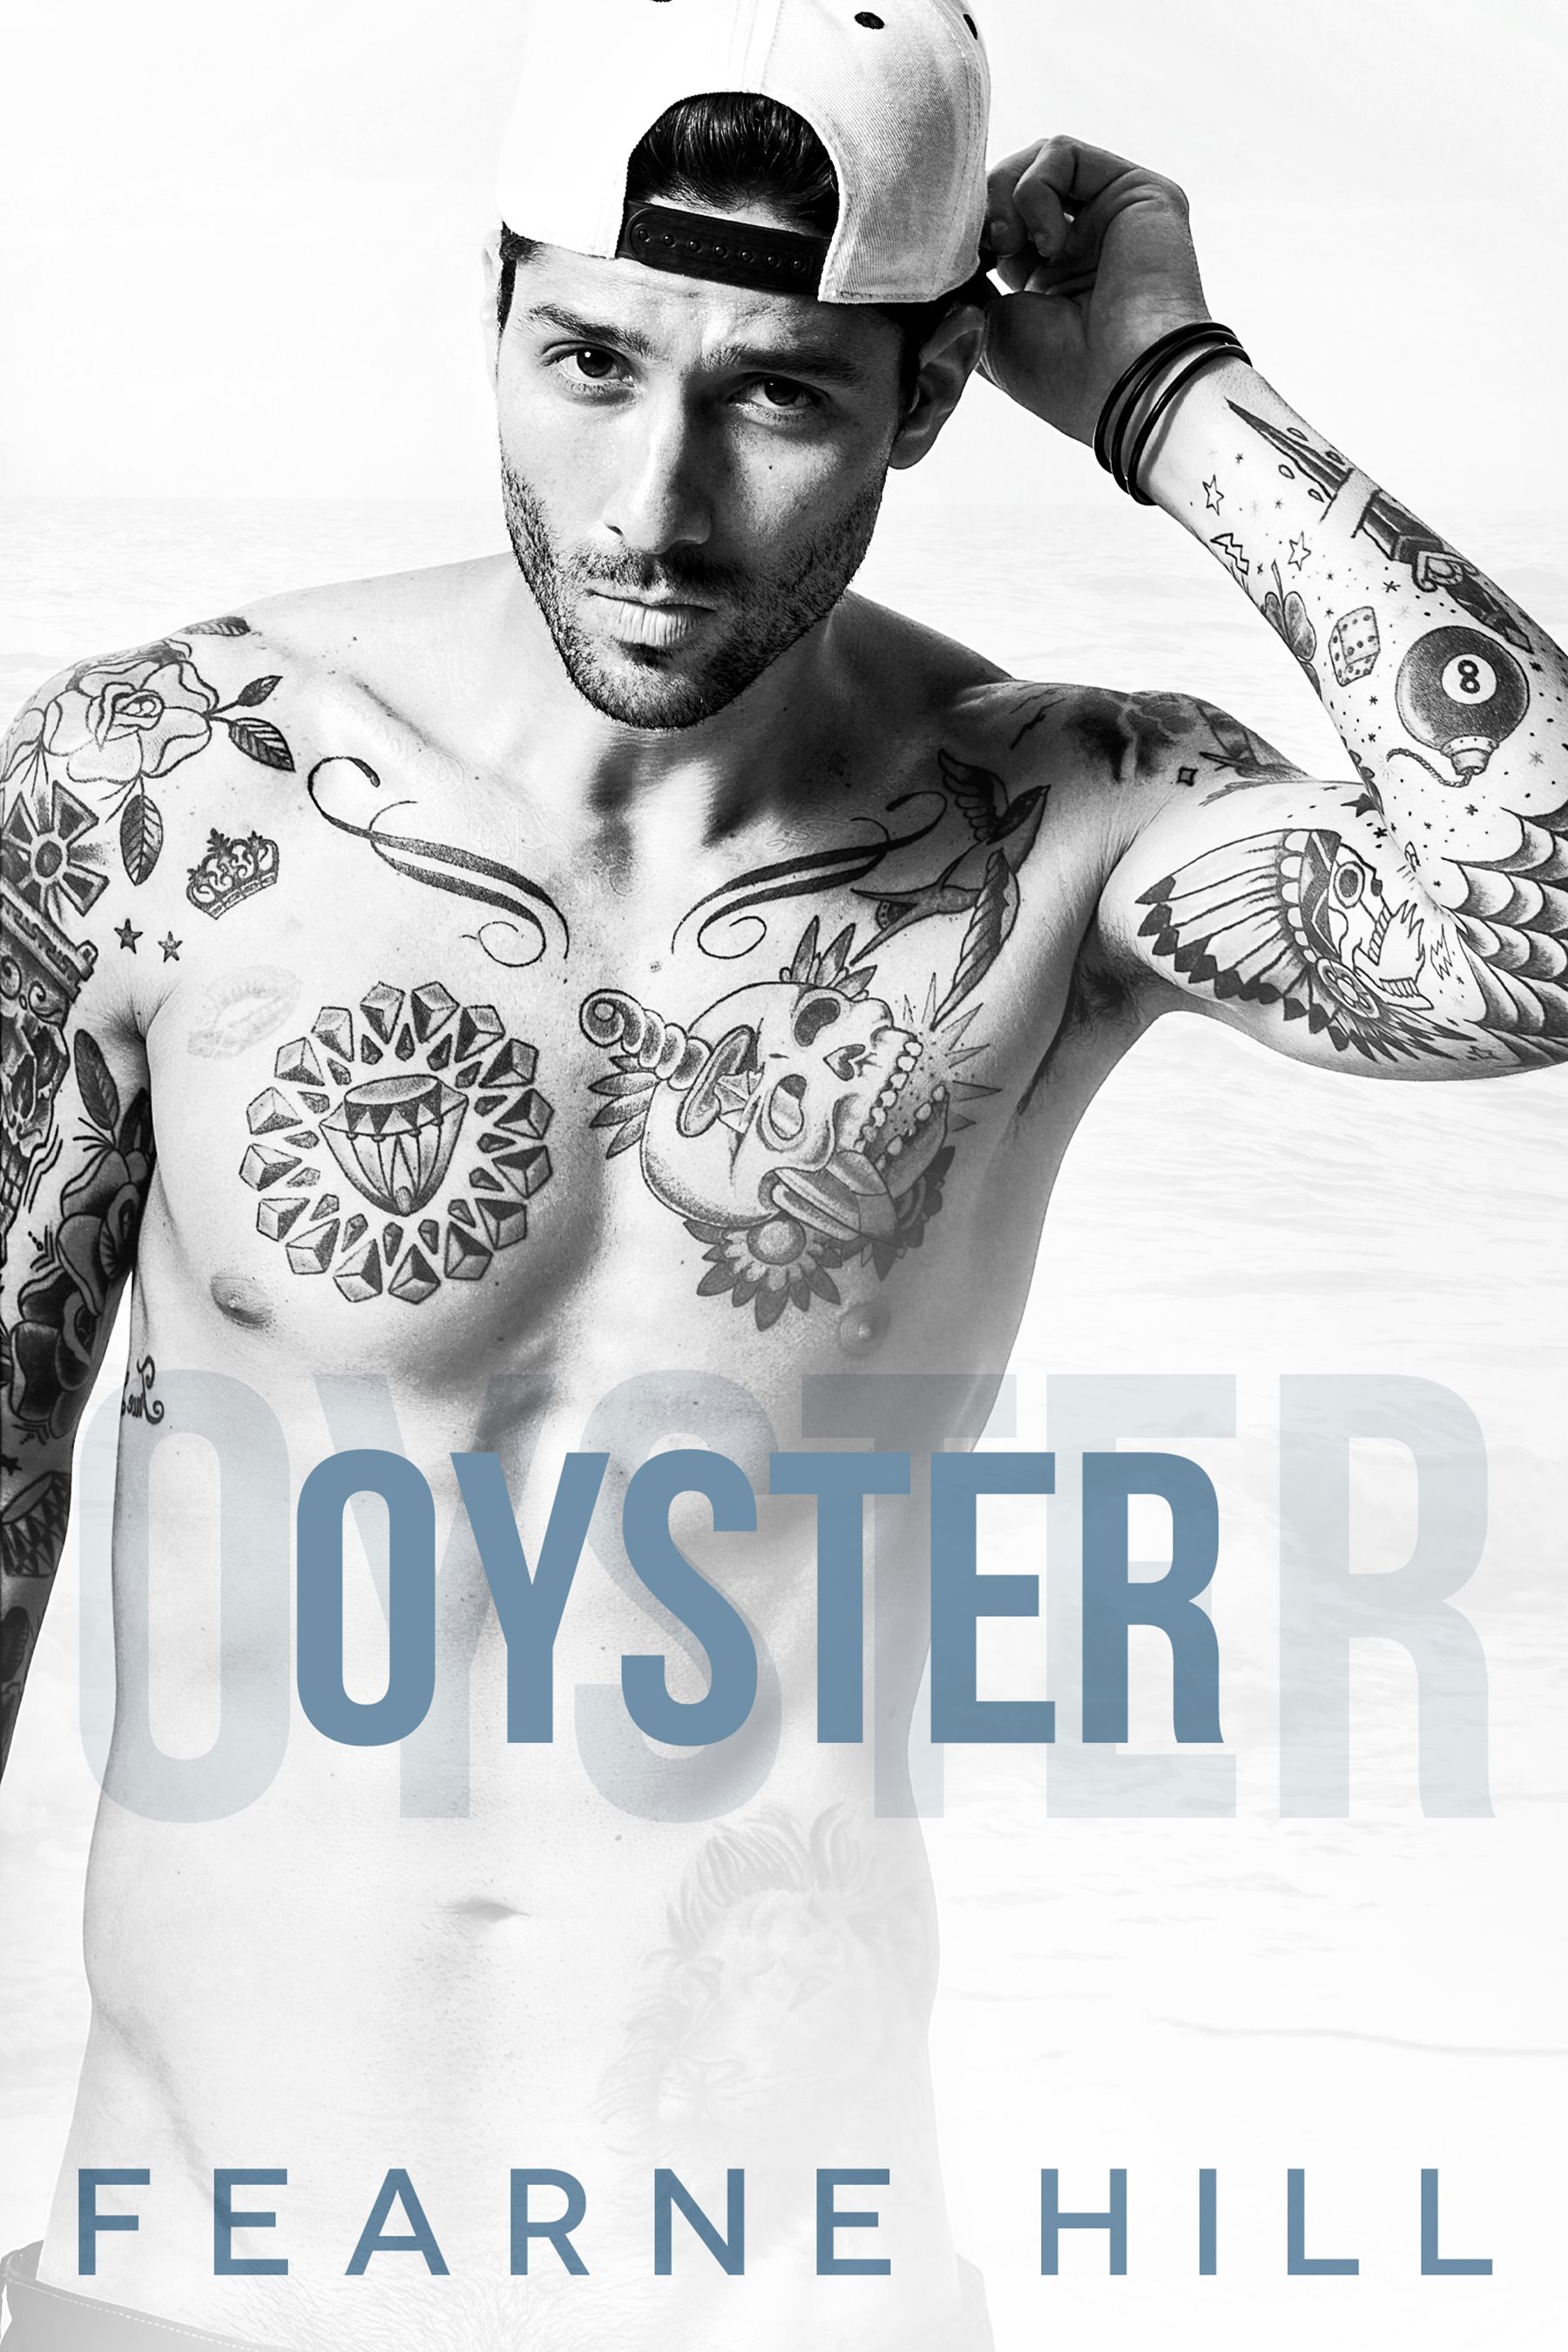 A black and white photo of a shirtless man with tattoos for a book called Oyster by Fearne Hill.